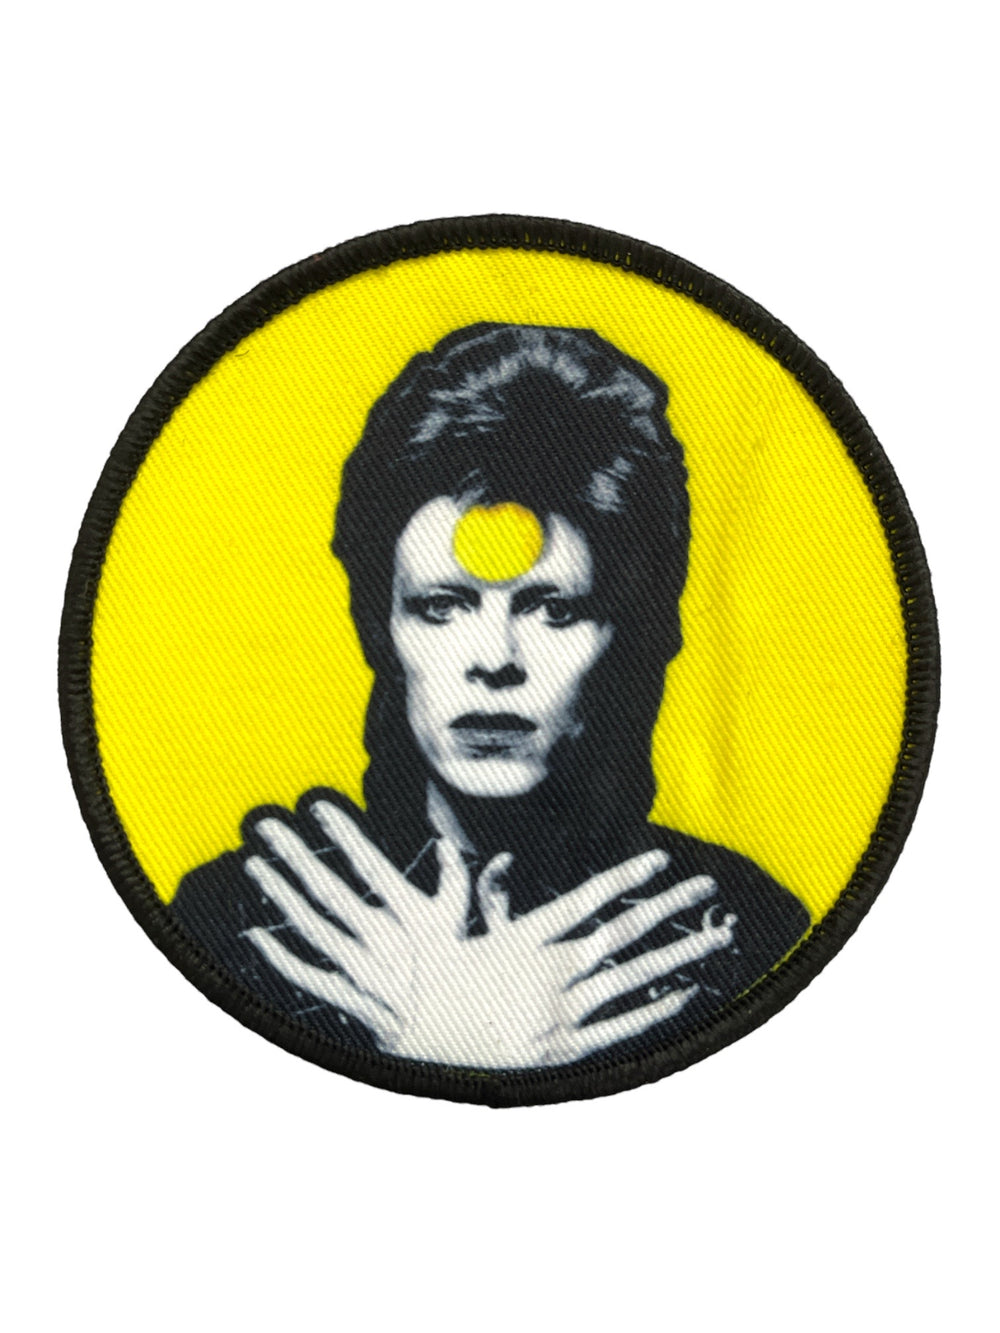 David Bowie Ziggy Round Official Woven Patch Brand New